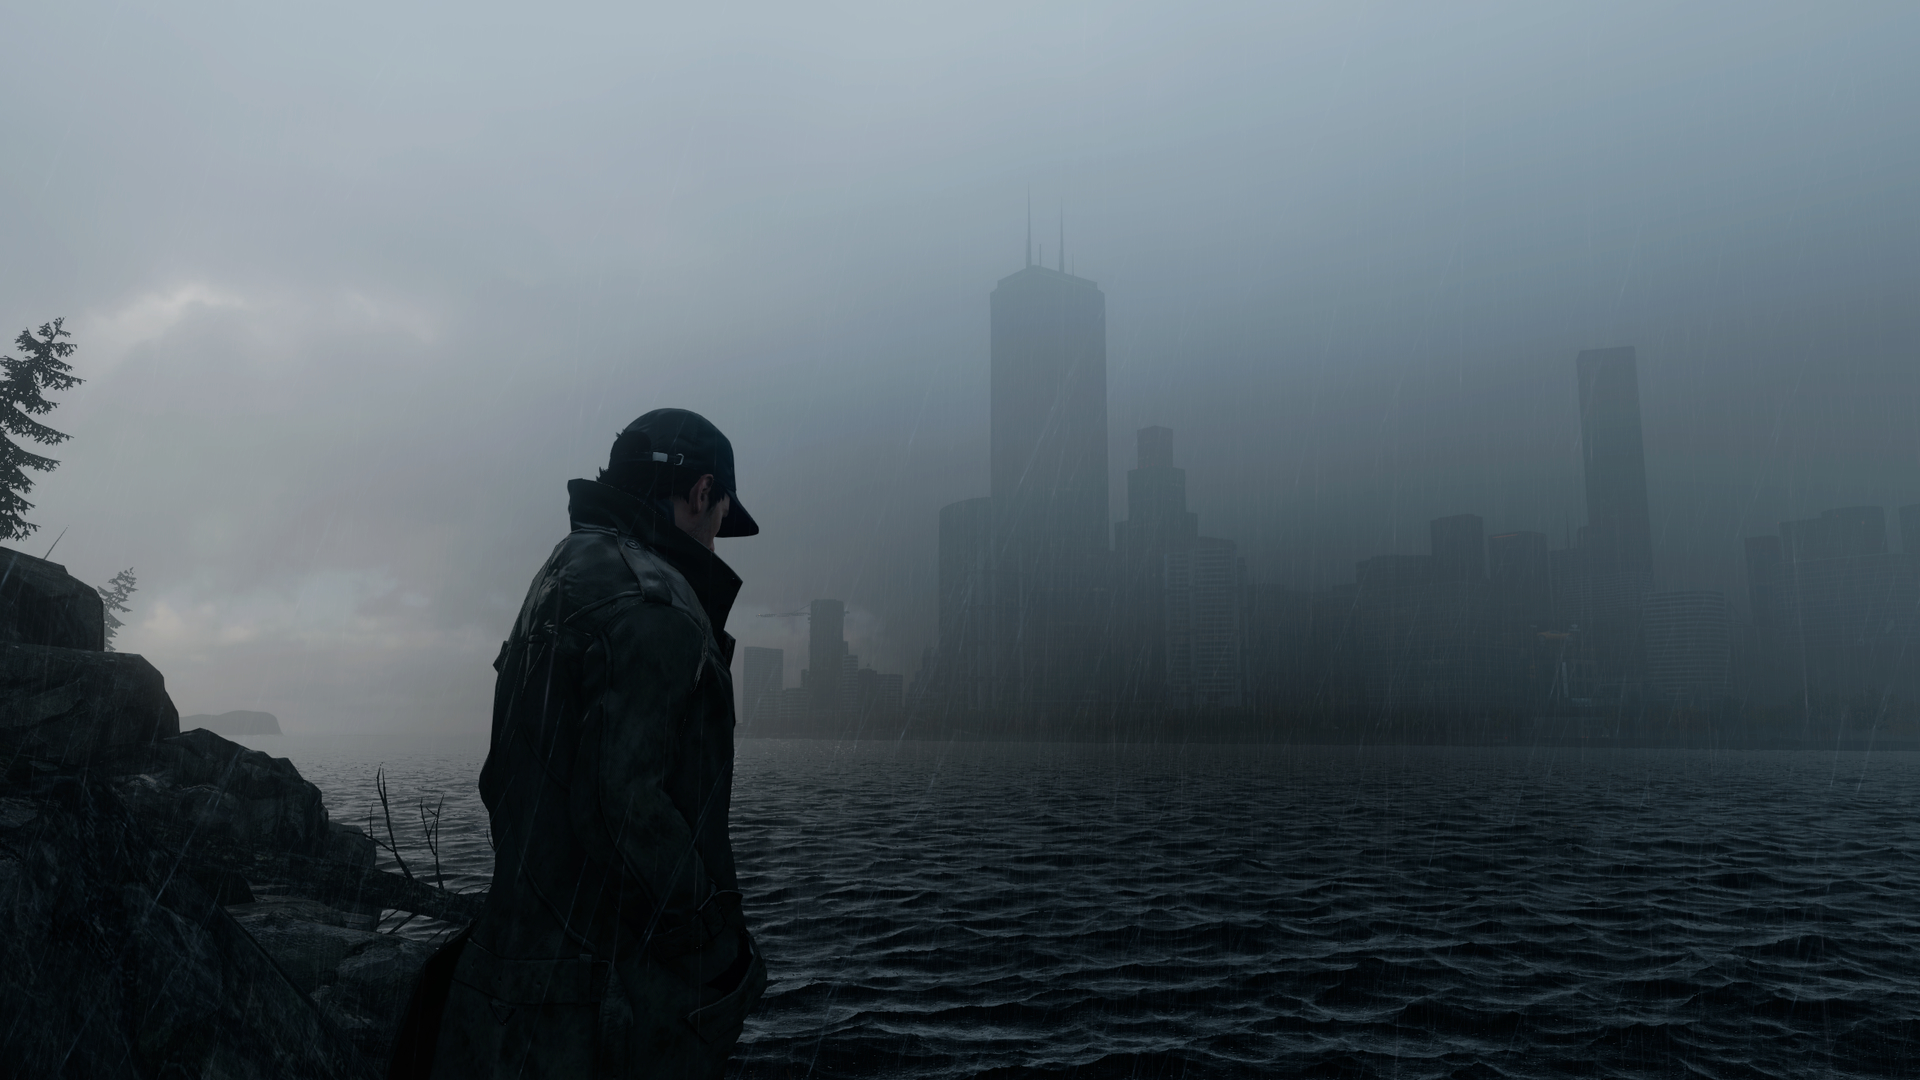 watch_dogs_exe_dx11_20140530_155712_1080p_by_confidence_man-d7keoph.jpg